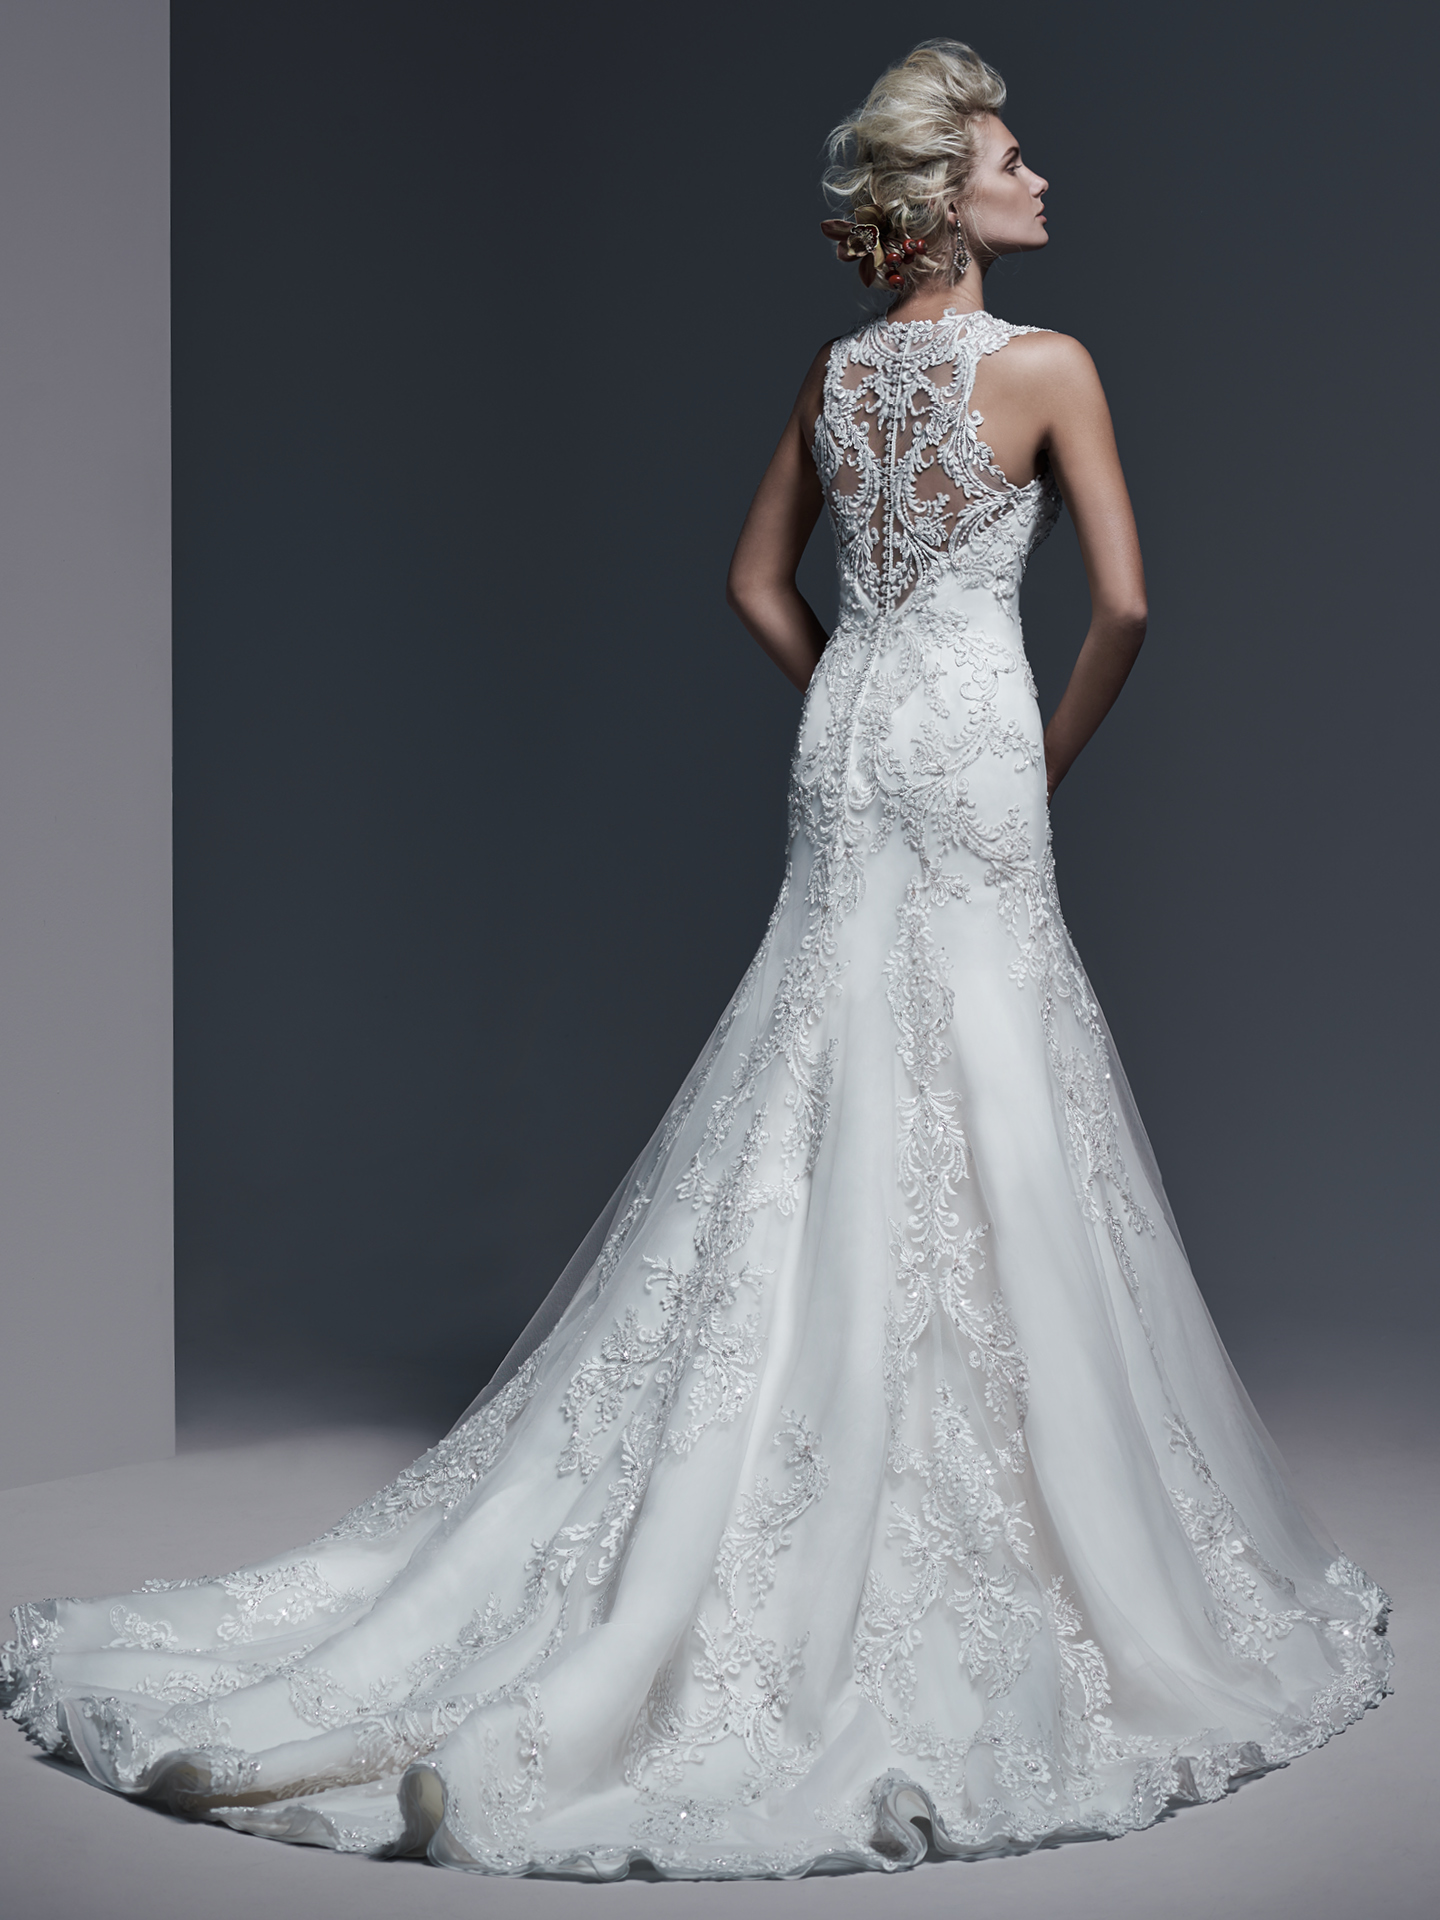 Embellished lace A-line wedding dress Monticella by Sottero and Midgley. Modern Royalty: Wedding Dresses Inspired by the Royal Engagement